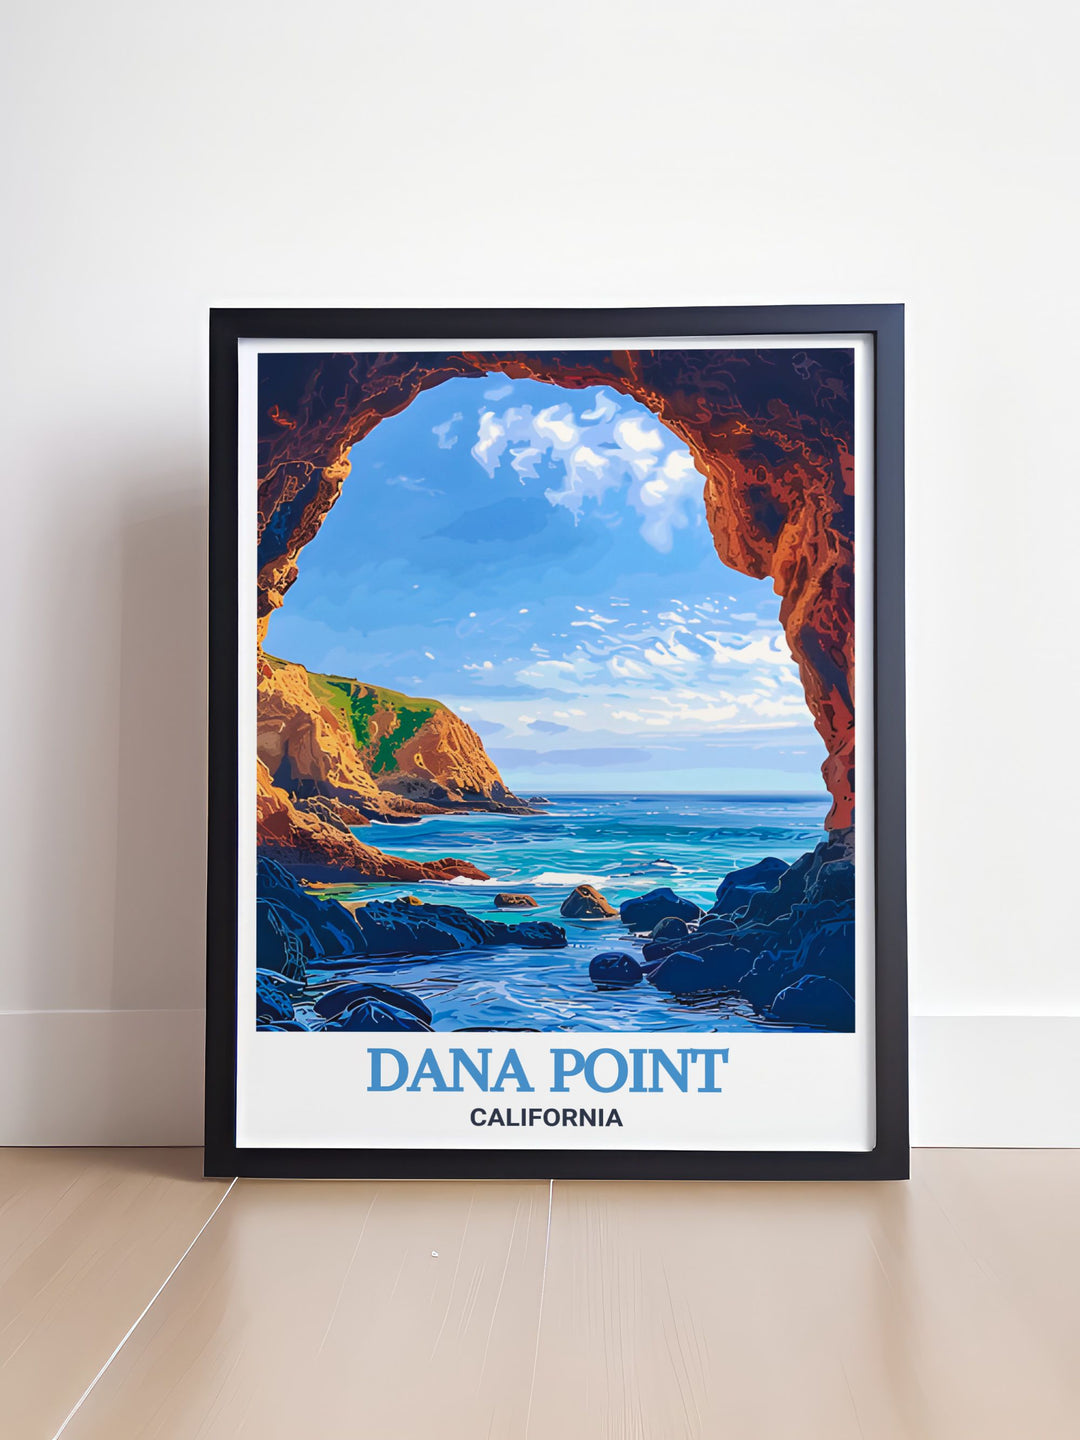 Bring the allure of Dana Point Caves into your home with this exquisite wall art. Ideal for California decor enthusiasts, this print captures the serene and captivating essence of Dana Points coastal caves.